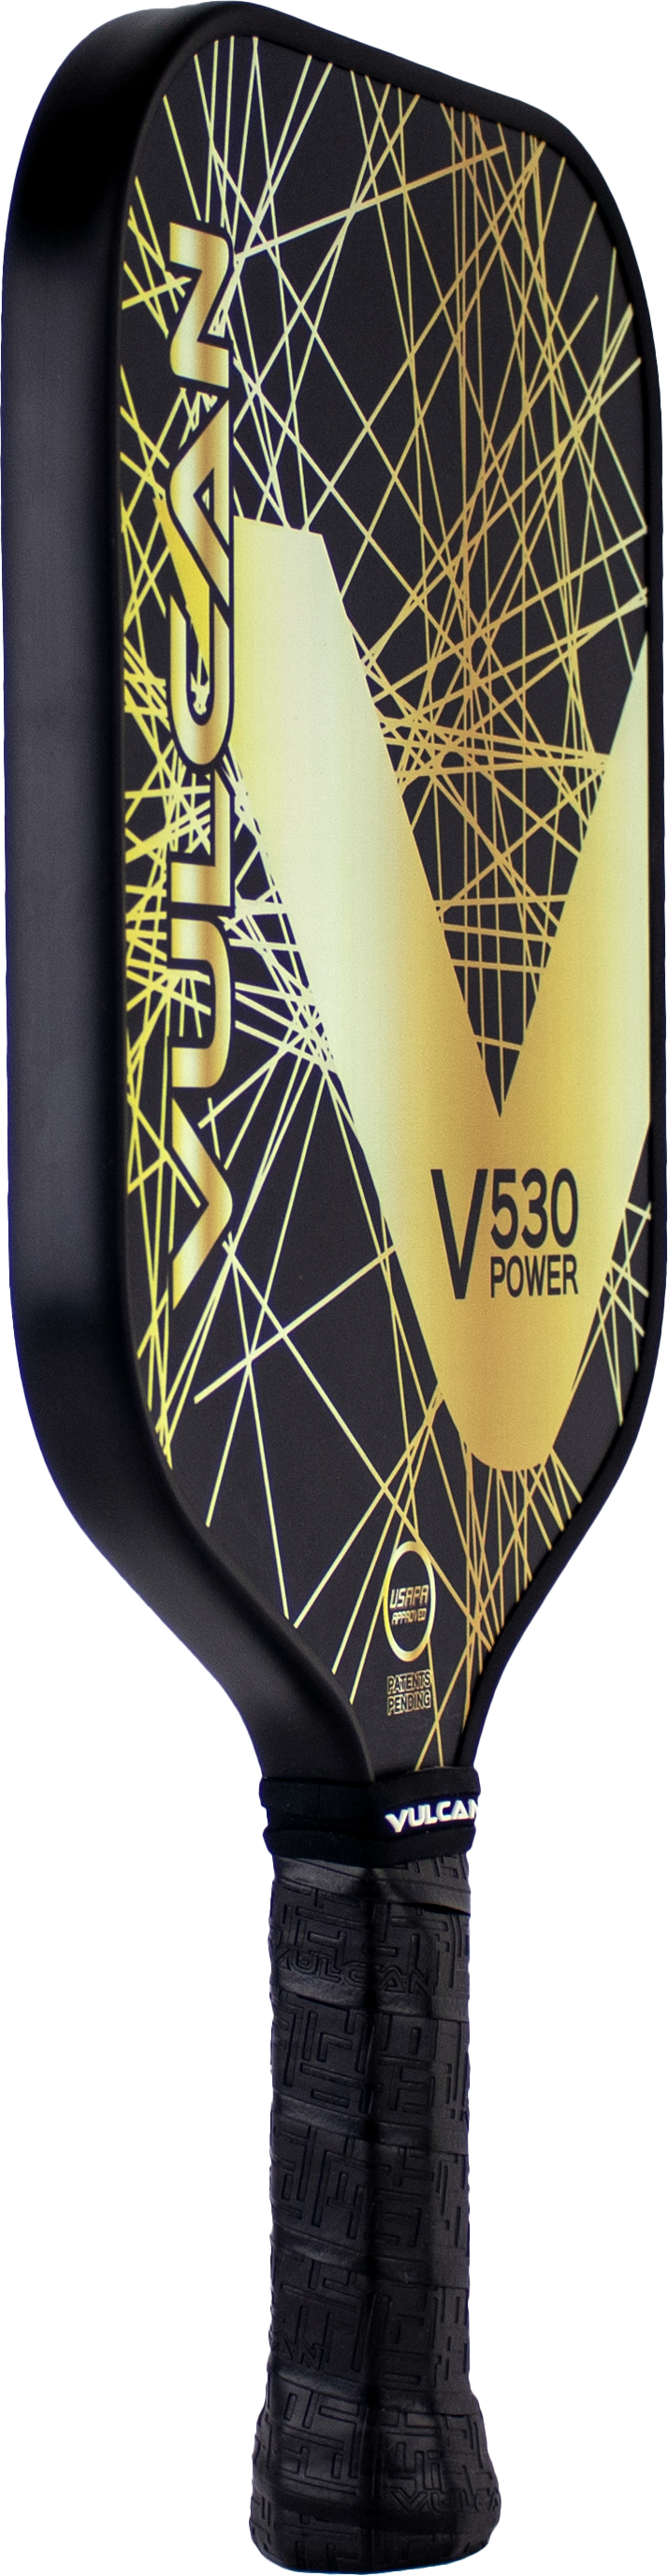 The Vulcan V530 Power Pickleball Paddle is shown on a white background.